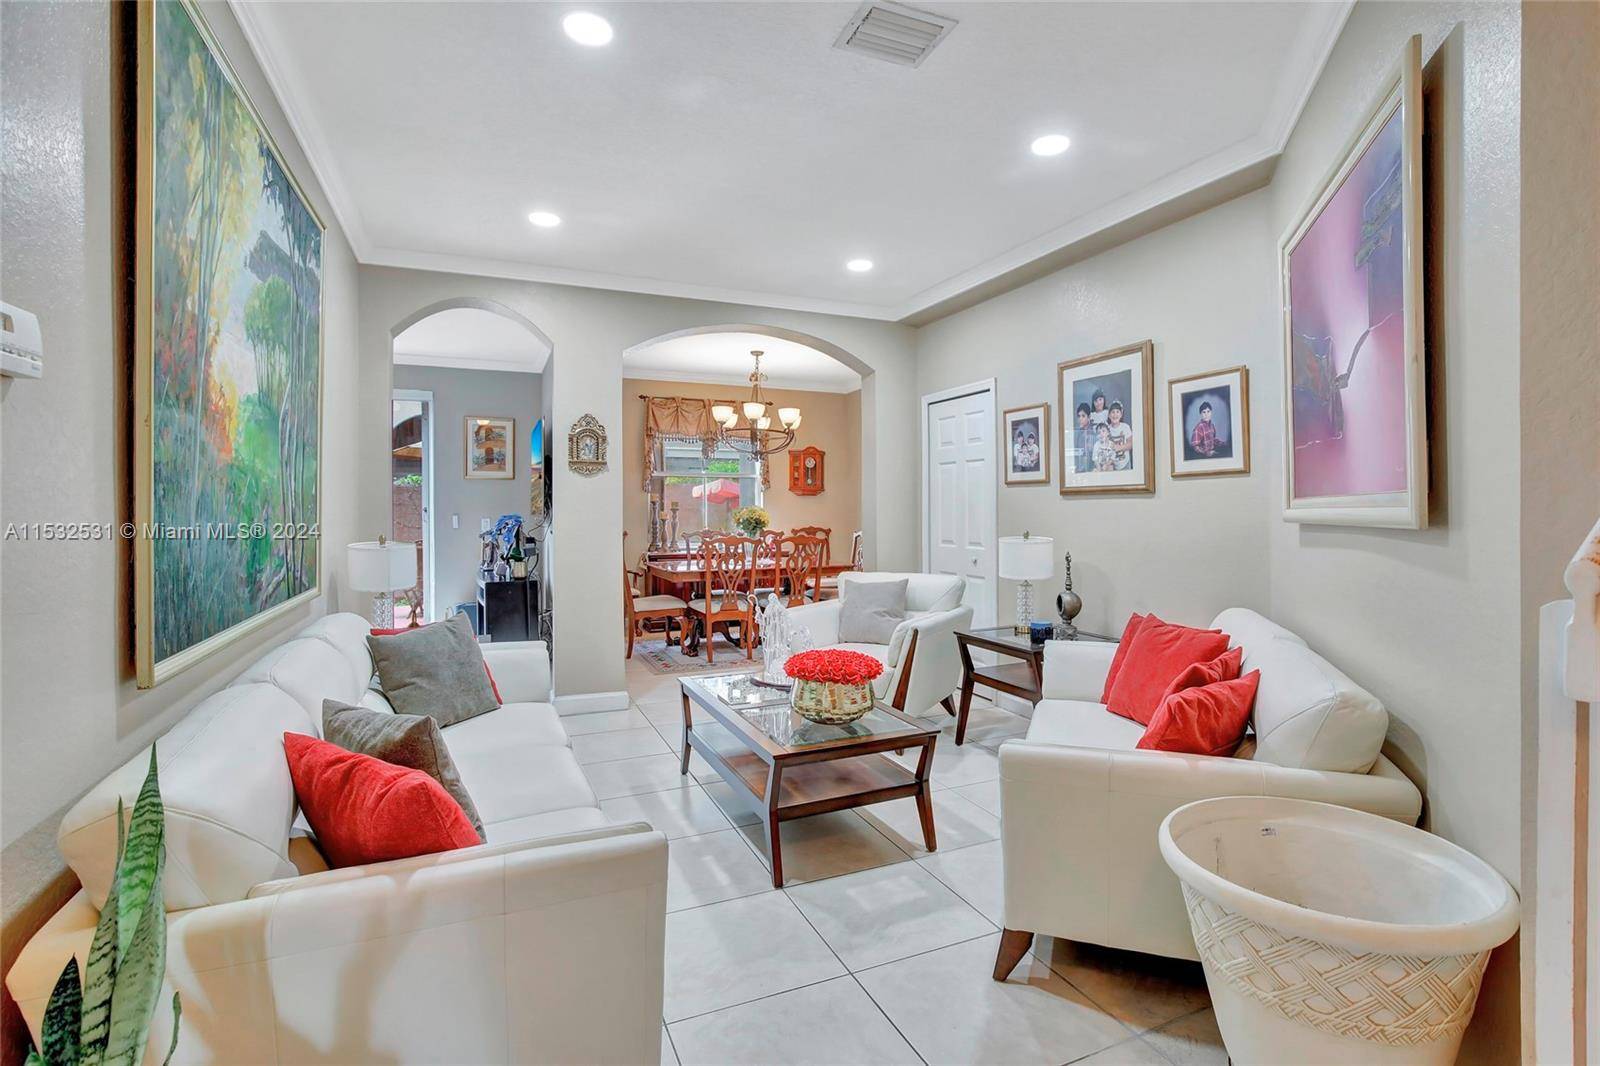 This lovely corner 4BD 3BTH townhouse located in the gated community of Villas at Nautica in the heart of Miramar !